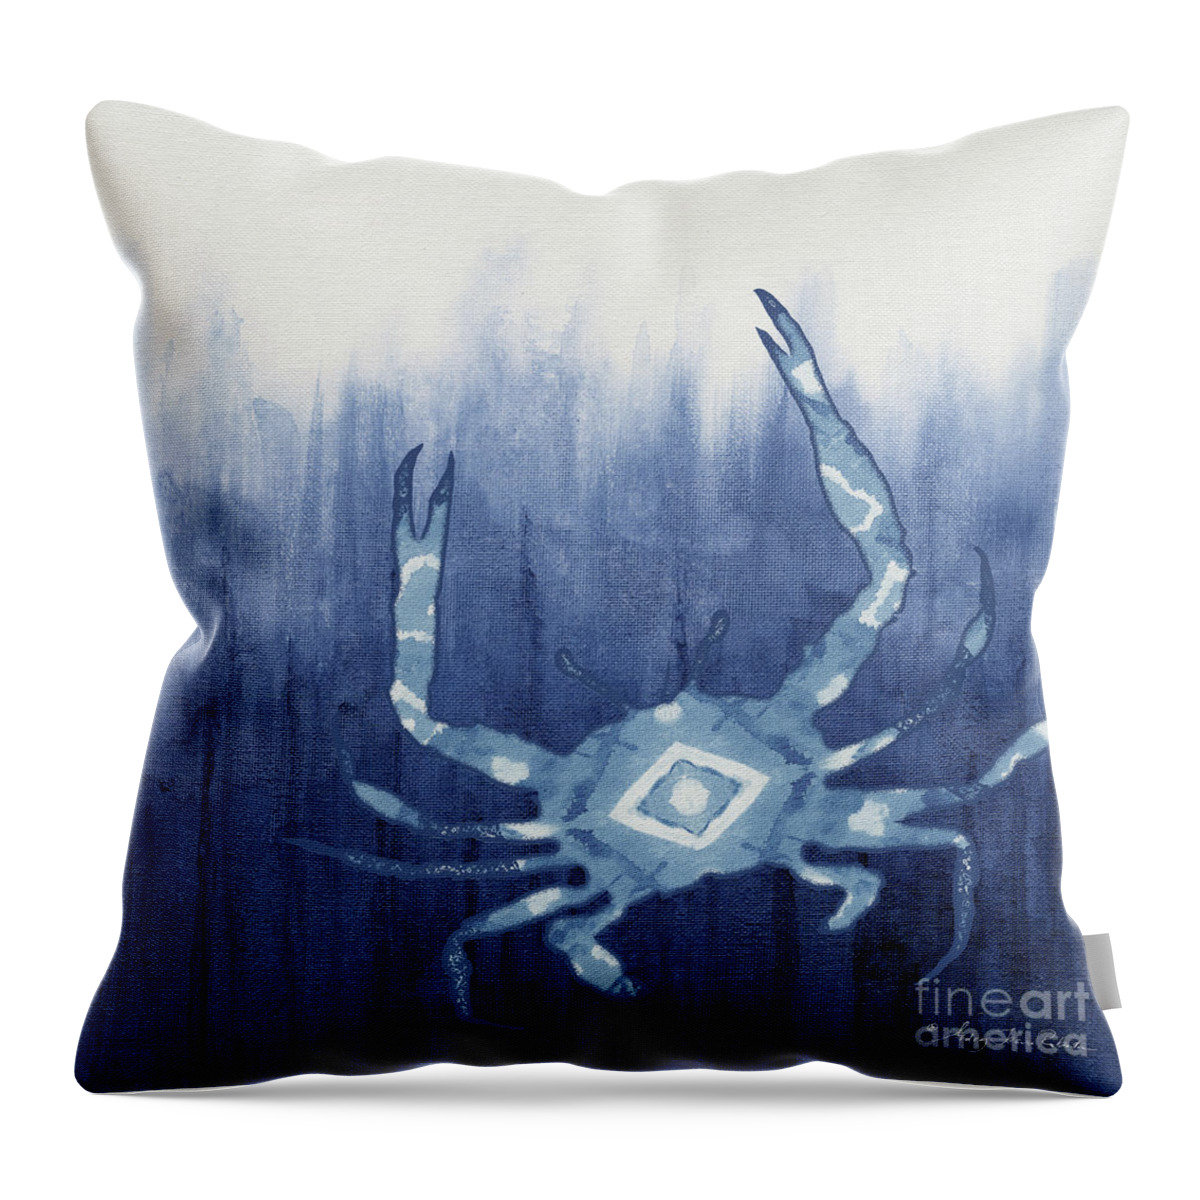 Blue Crab Throw Pillow featuring the painting Shibori Blue 4 - Patterned Blue Crab over Indigo Ombre Wash by Audrey Jeanne Roberts